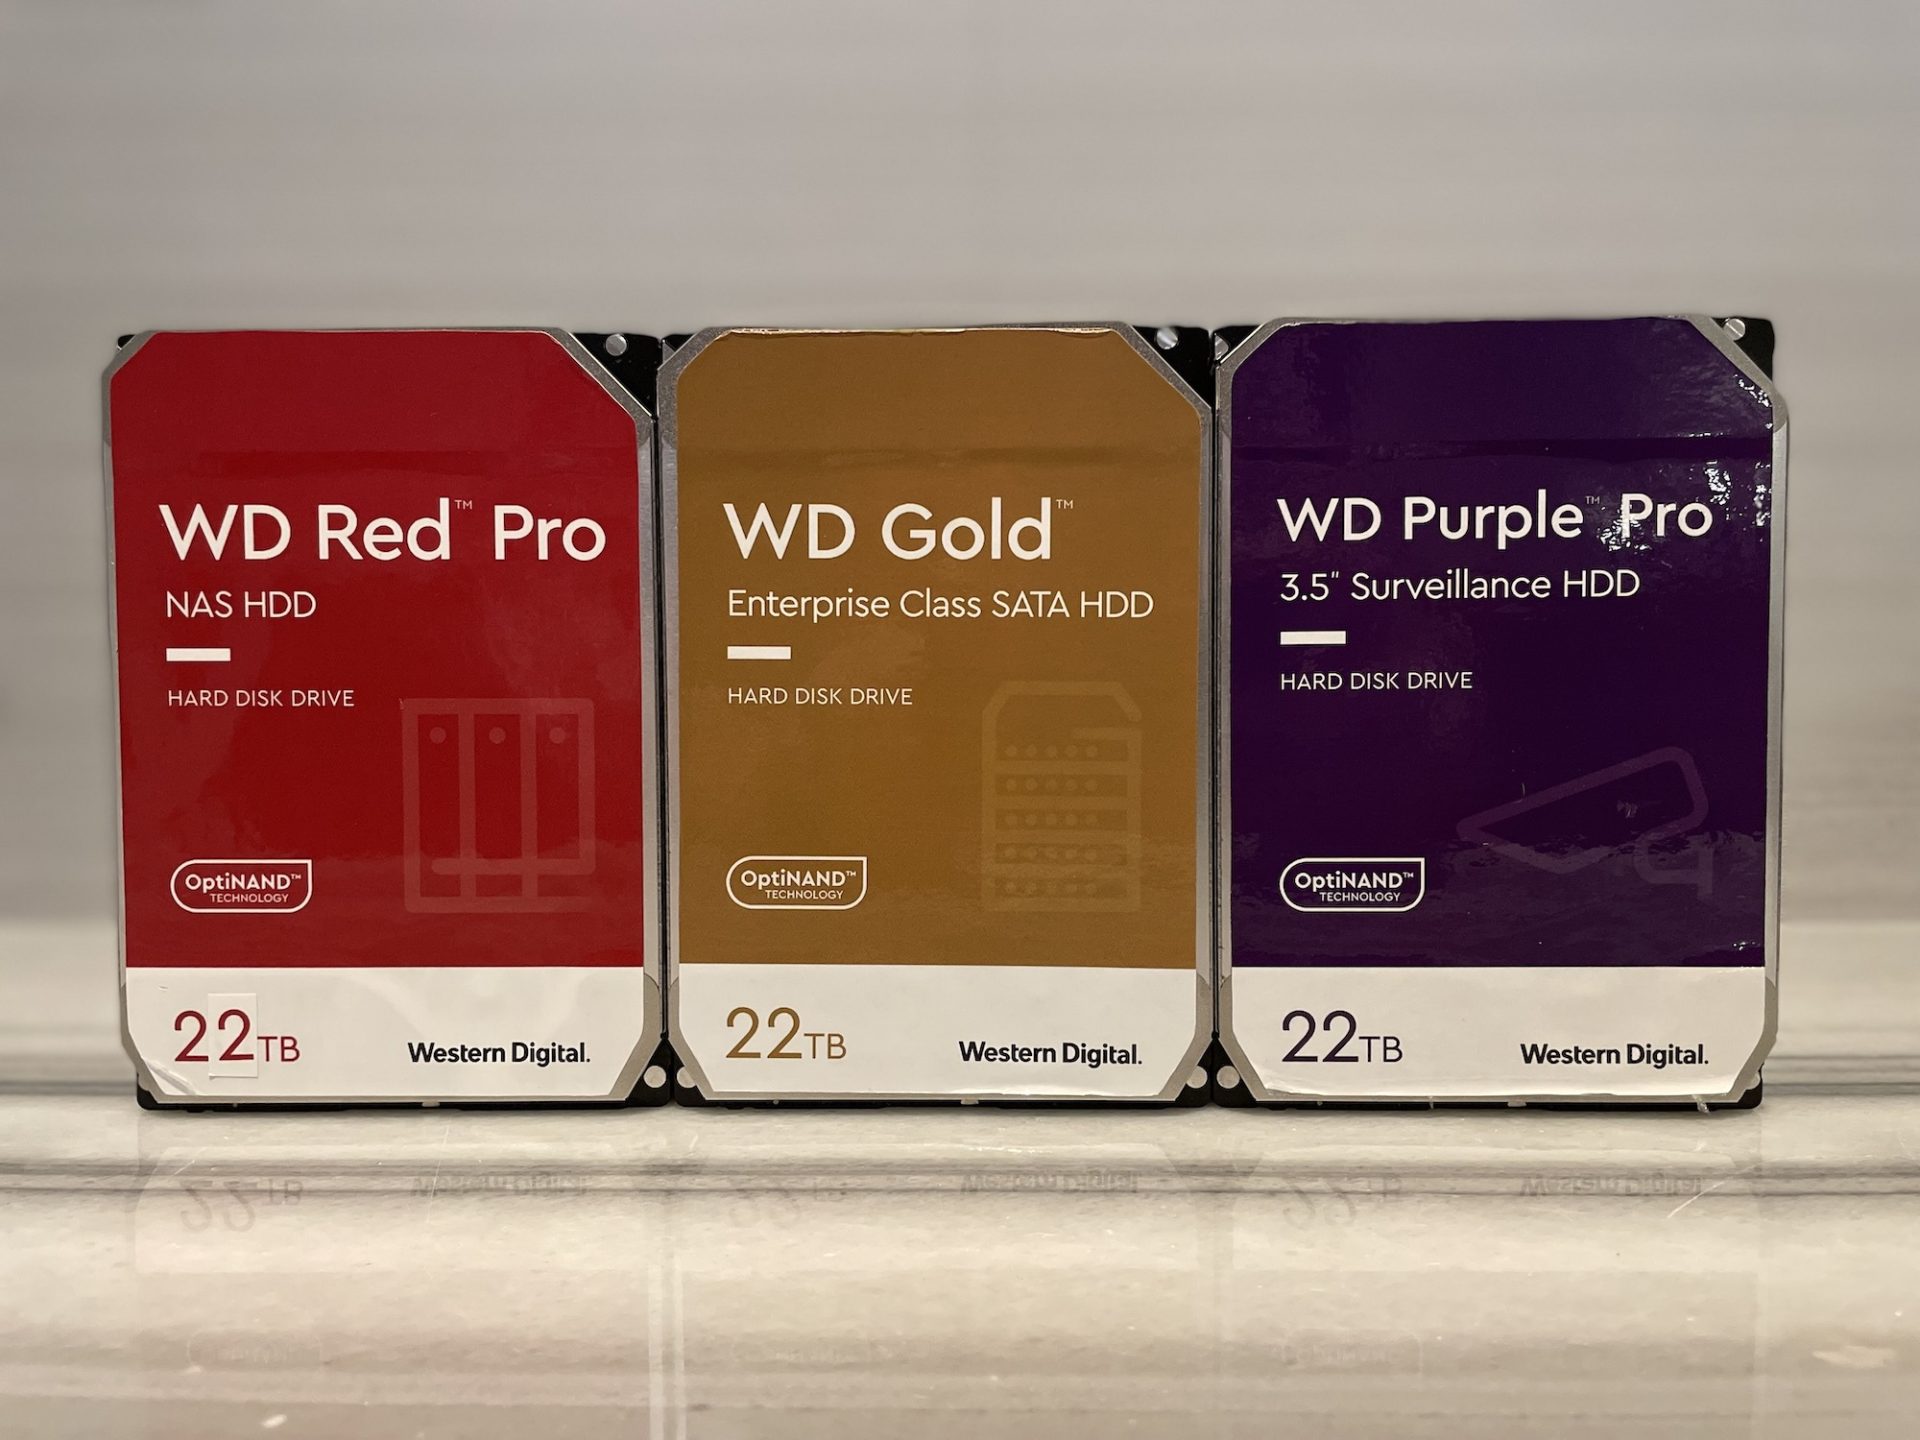 Sammenhængende Falde tilbage Løse WD Gold, WD Red Pro and WD Purple Pro 22TB CMR HDDs Now Shipping -  StorageReview.com